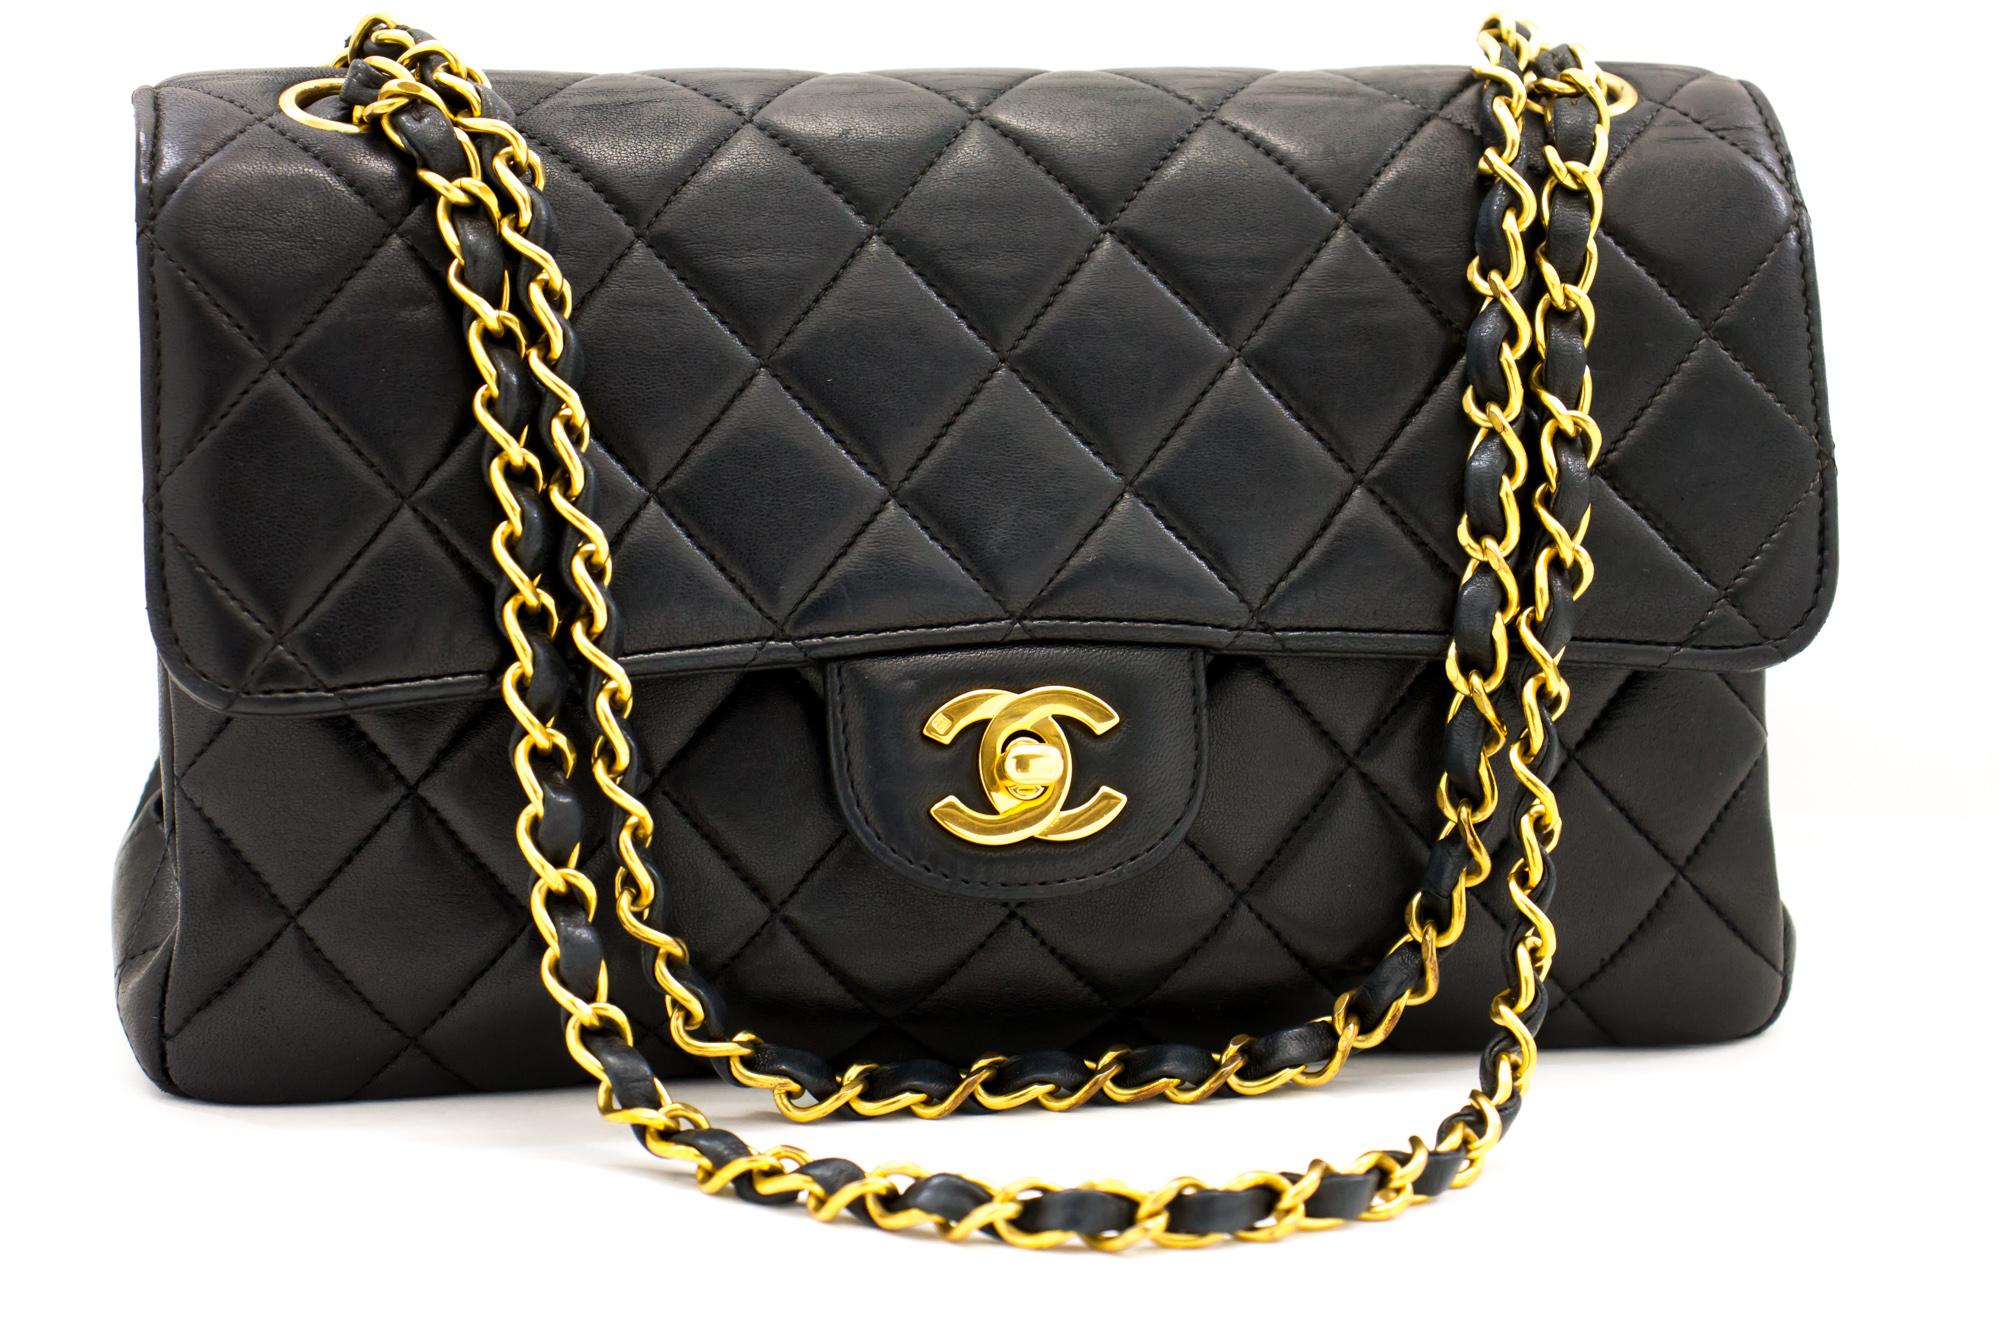 An authentic CHANEL Two Face Double Sided Flap Chain Shoulder Bag Black Quilted. The color is Black. The outside material is Leather. The pattern is Solid. This item is Vintage / Classic. The year of manufacture would be 1994-1996.
Conditions &